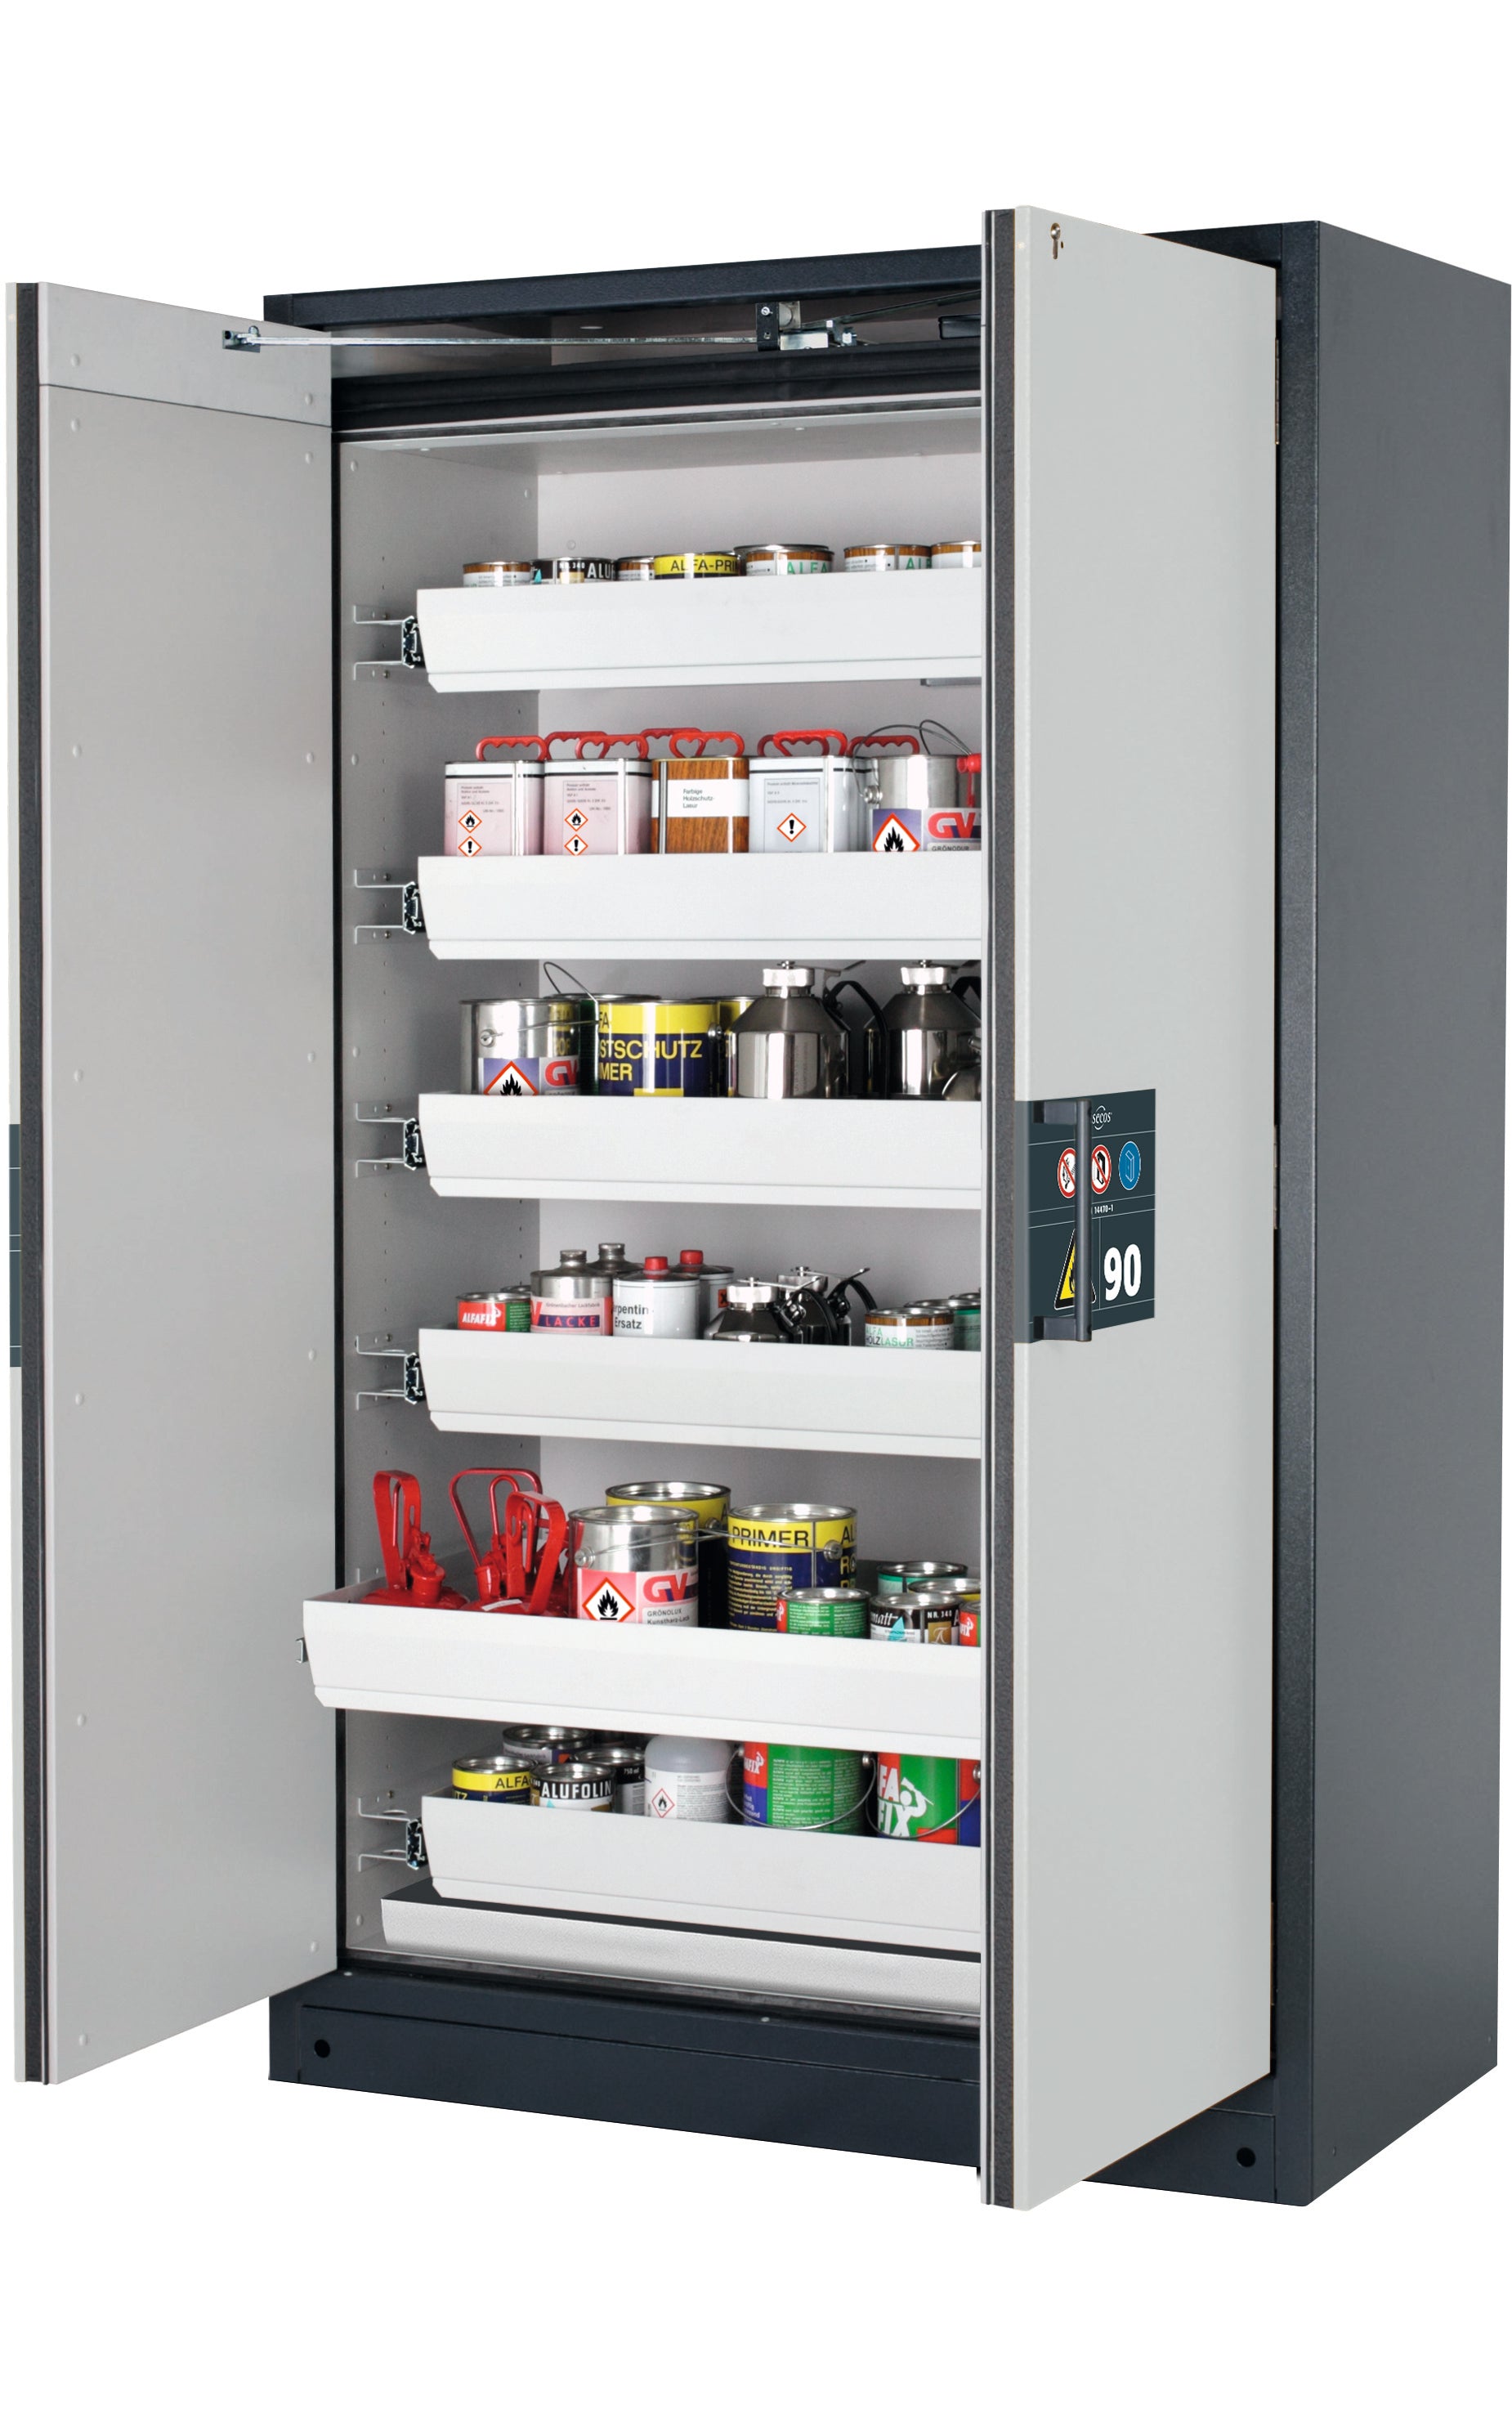 Type 90 safety storage cabinet Q-PEGASUS-90 model Q90.195.120.WDAC in light grey RAL 7035 with 6x drawer (standard) (sheet steel),